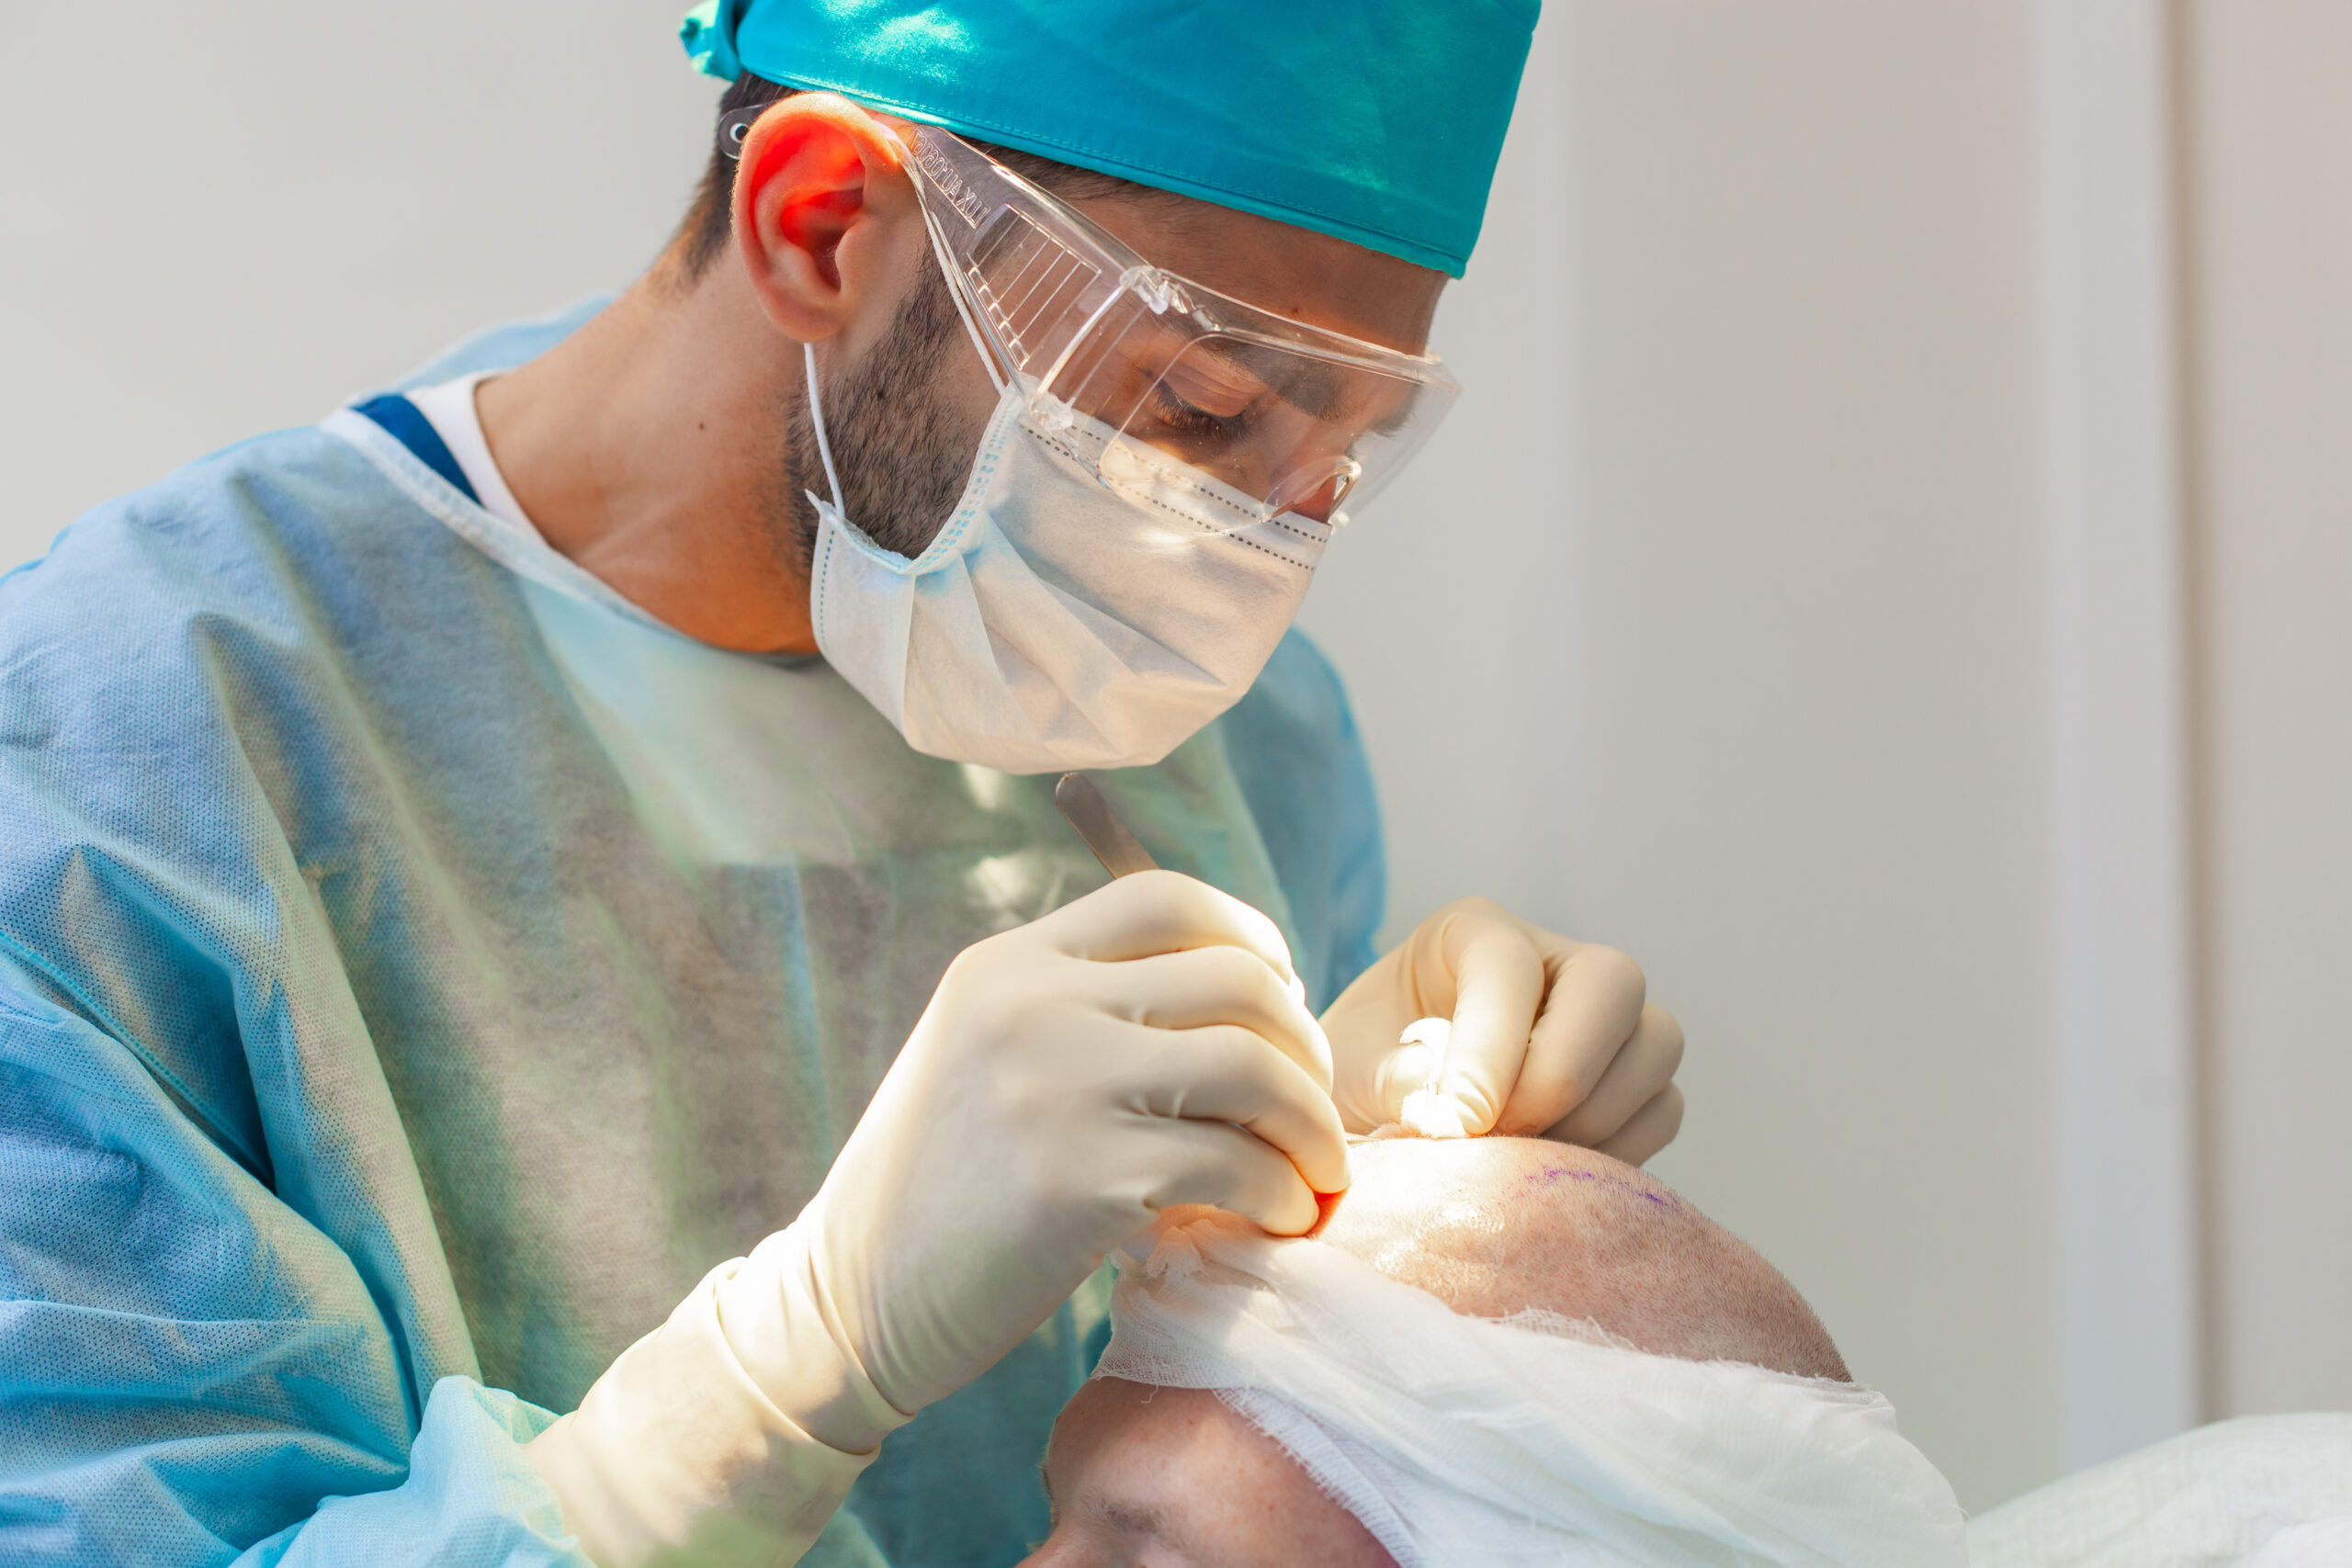 Doctor in scrubs and surgical mask performing a hair transplant procedure on a male patient.